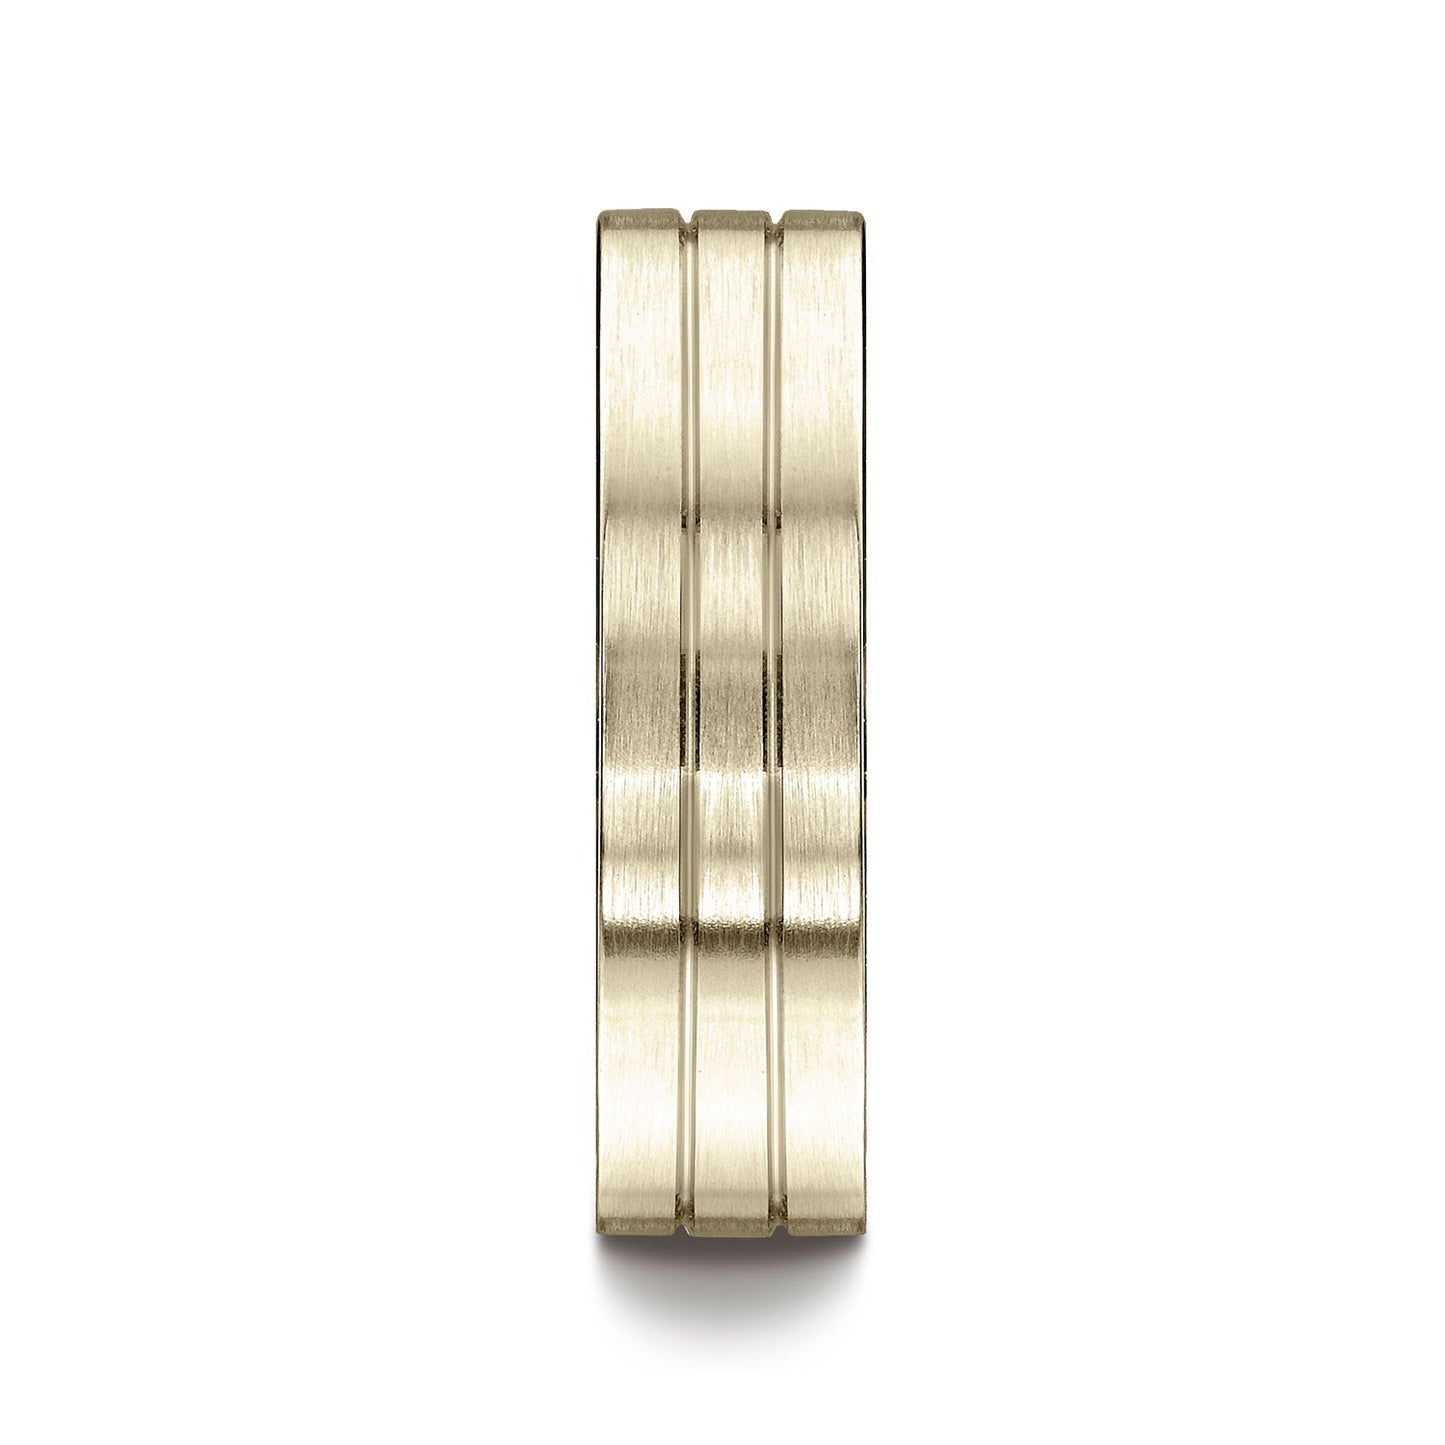 18k Yellow Gold 6mm Comfort-fit Satin-finished With Parallel Center Cuts Carved Design Band